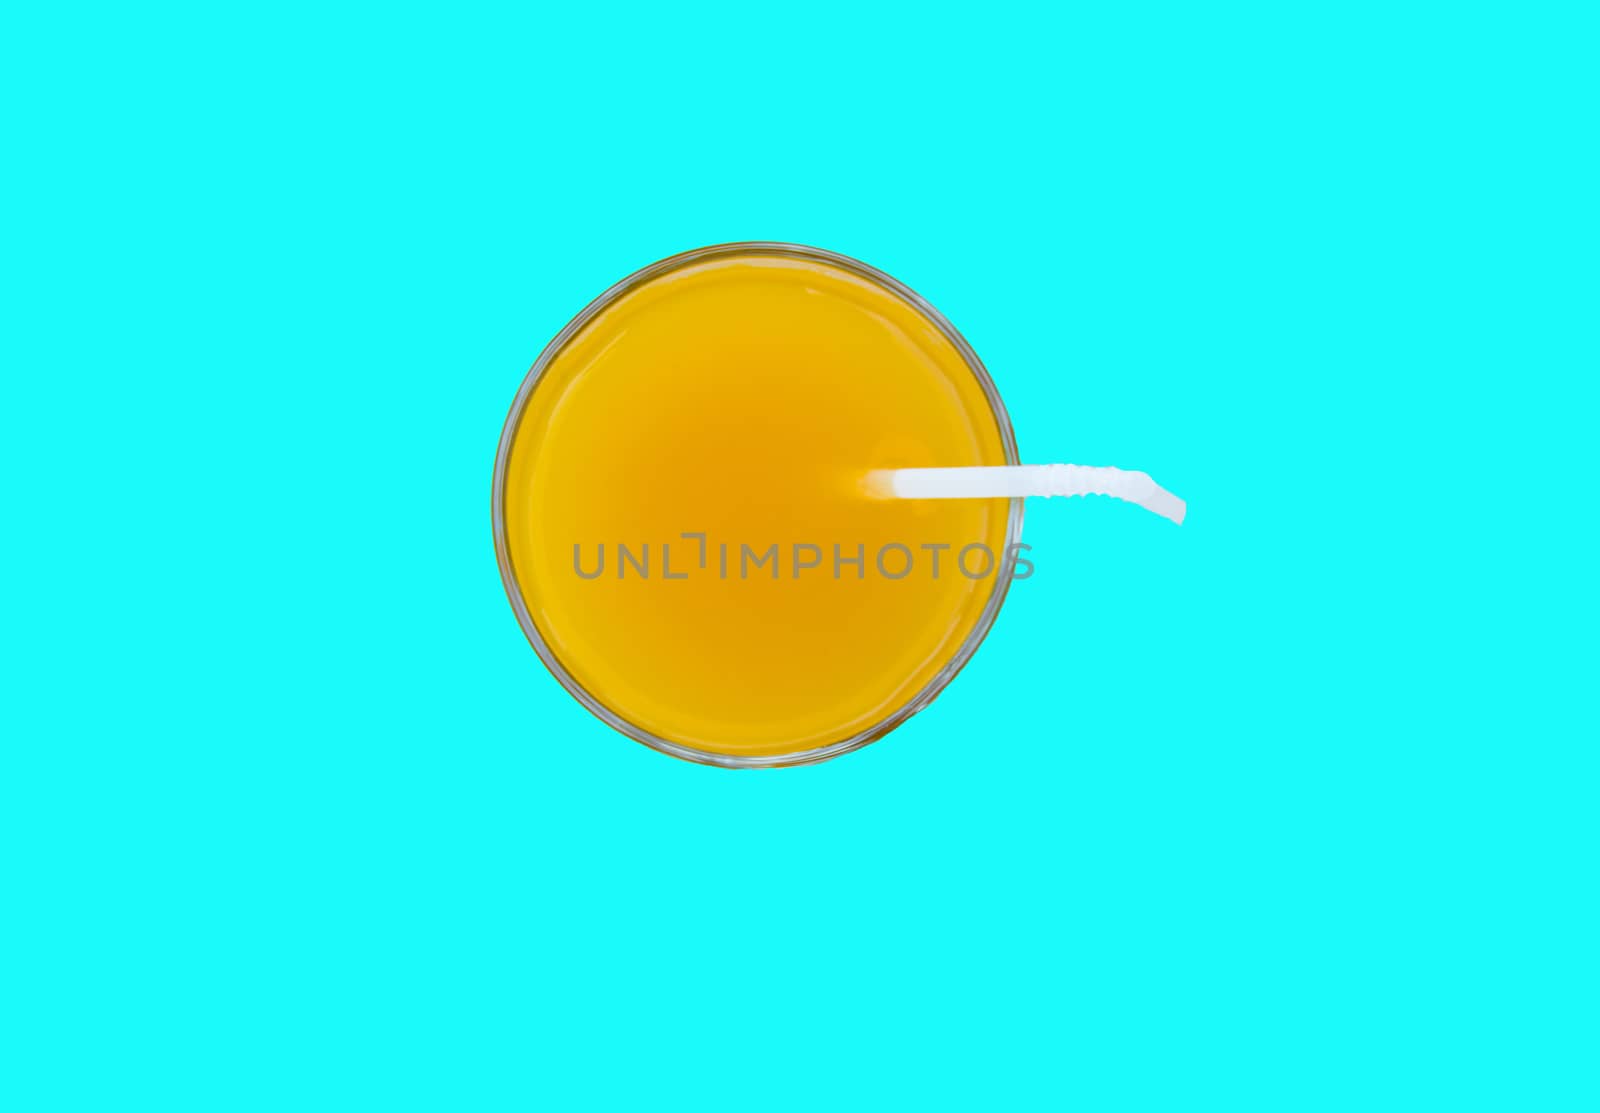 Summer drink - freshly squeezed orange juice in a glass with a straw tube, top view, isolated on a blue background with clipping, minimalism style by claire_lucia